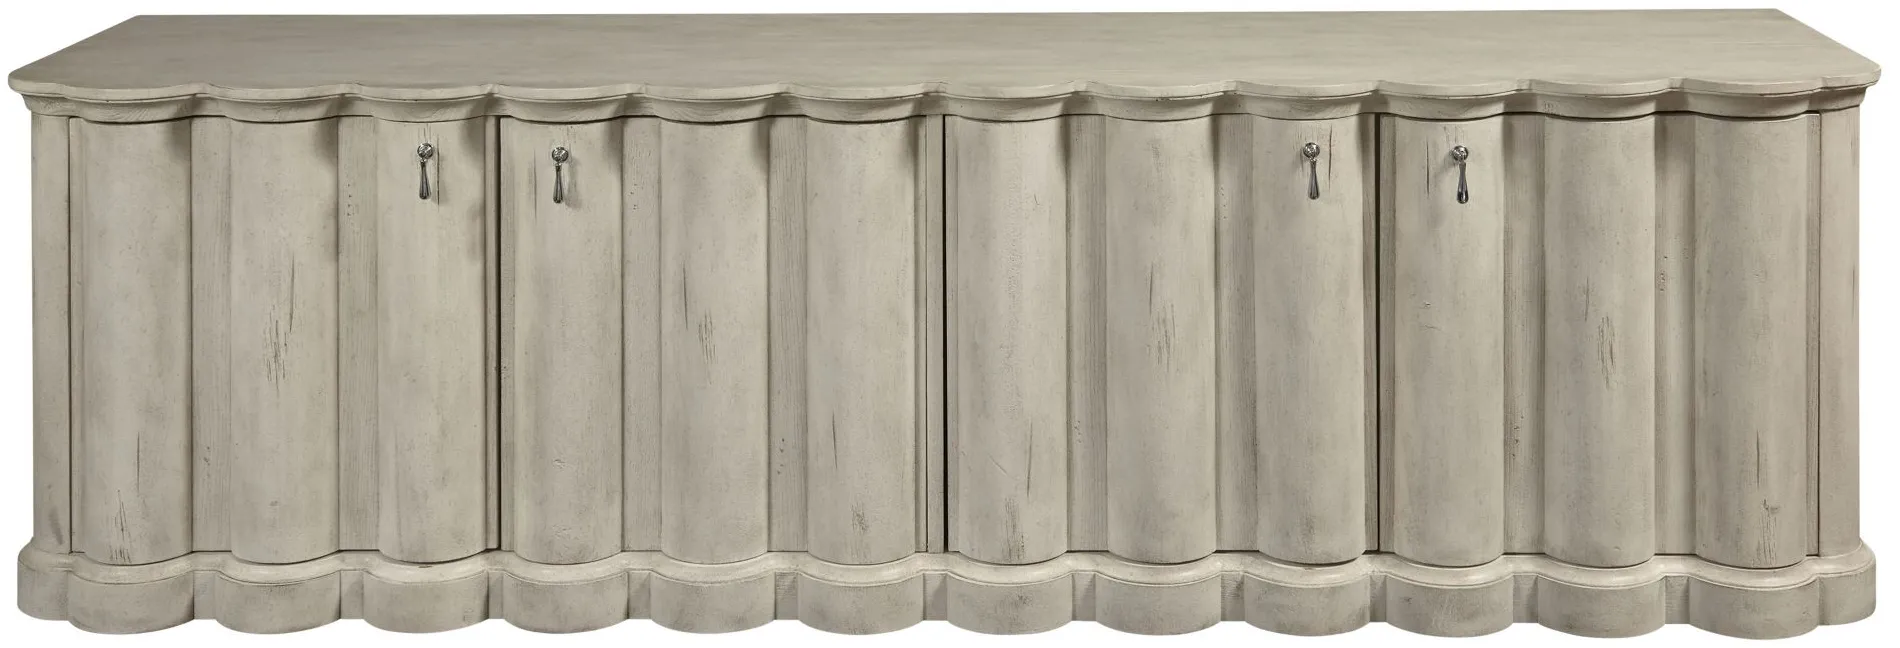 Pulaski Accents Entertainment Credenza in Natural by Samuel Lawrence